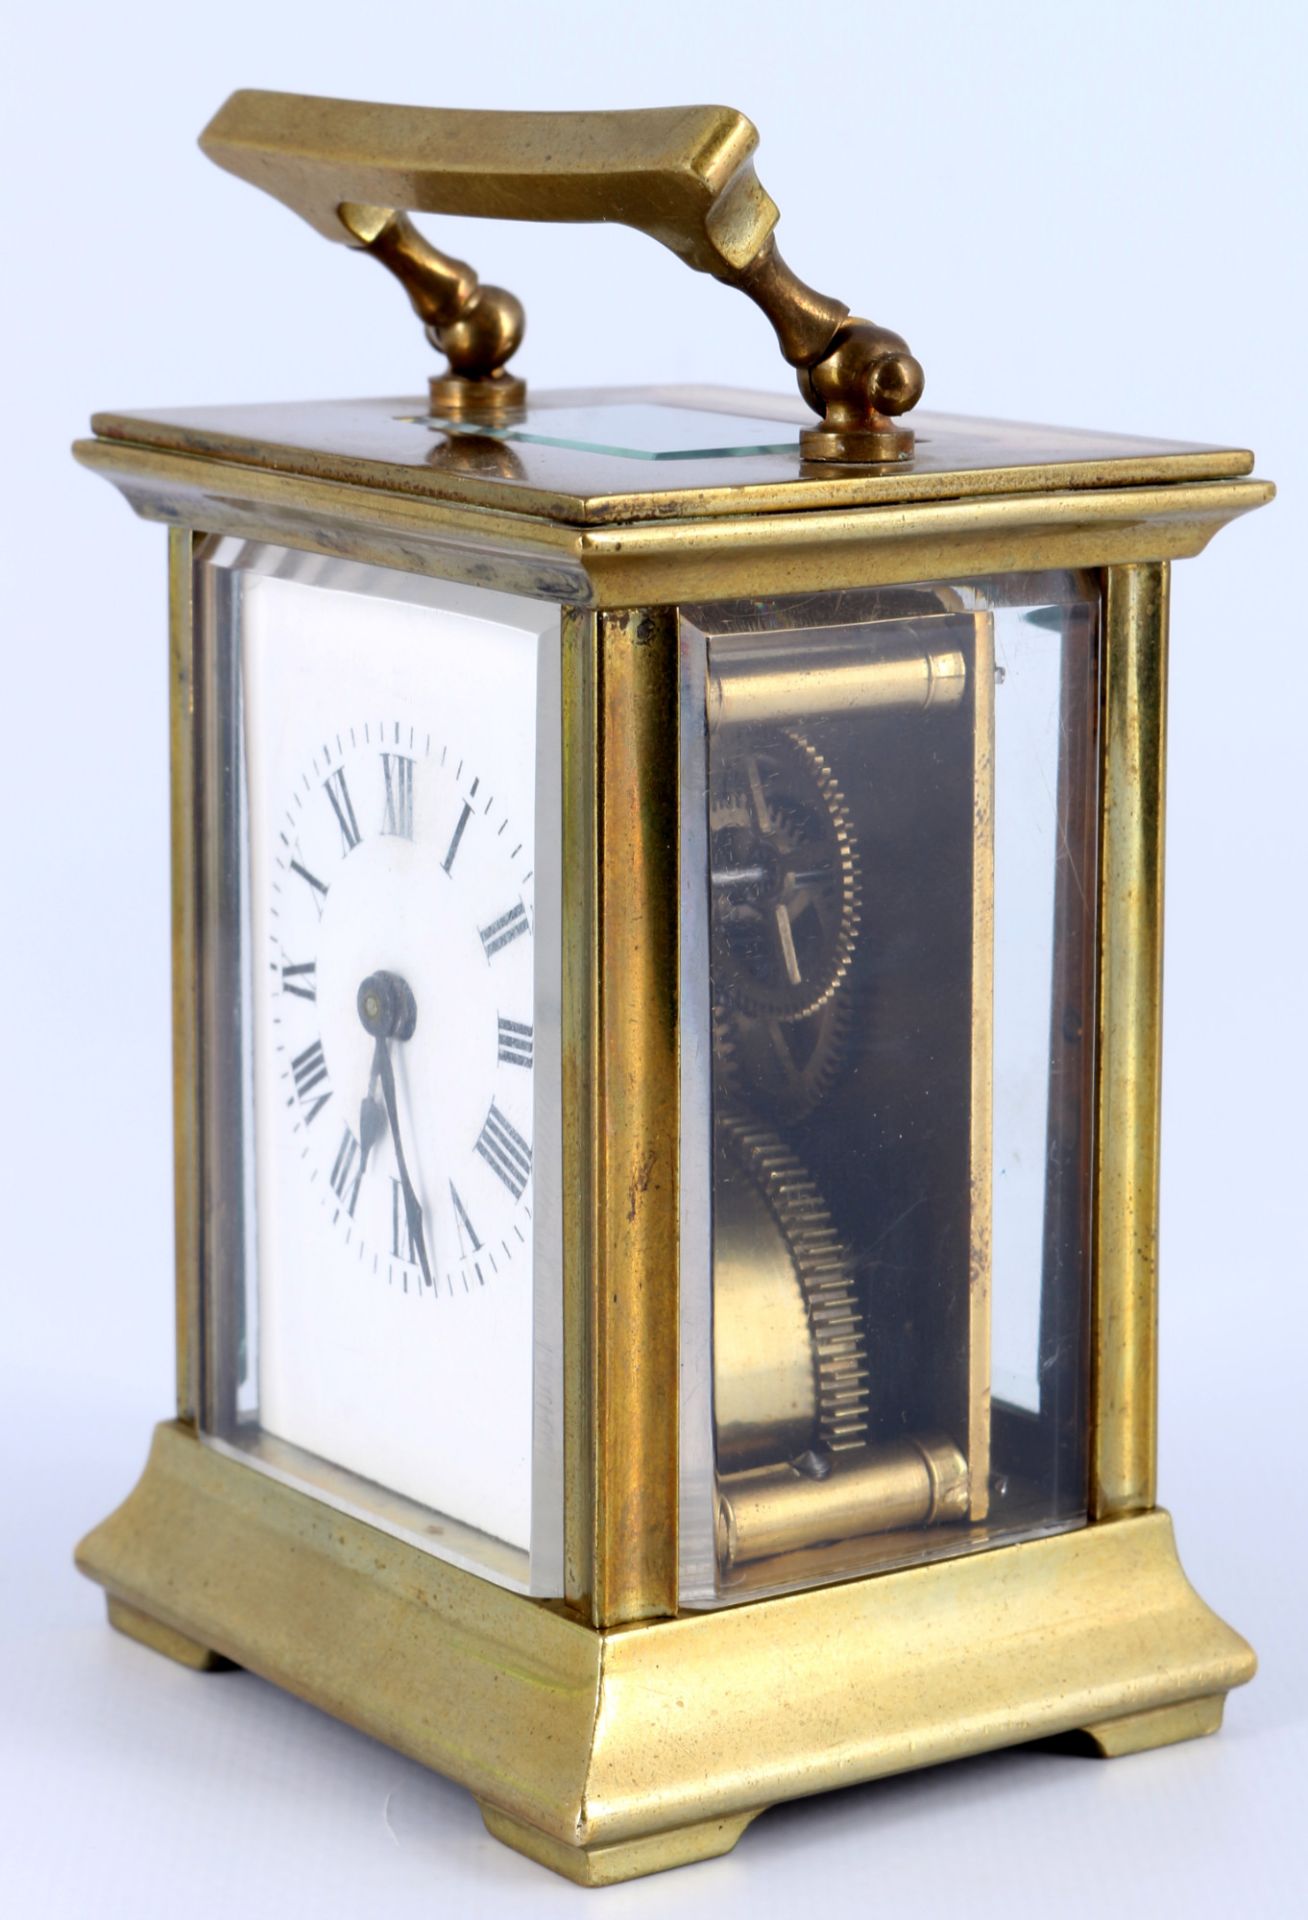 Carriage clock, France around 1900, - Image 2 of 8